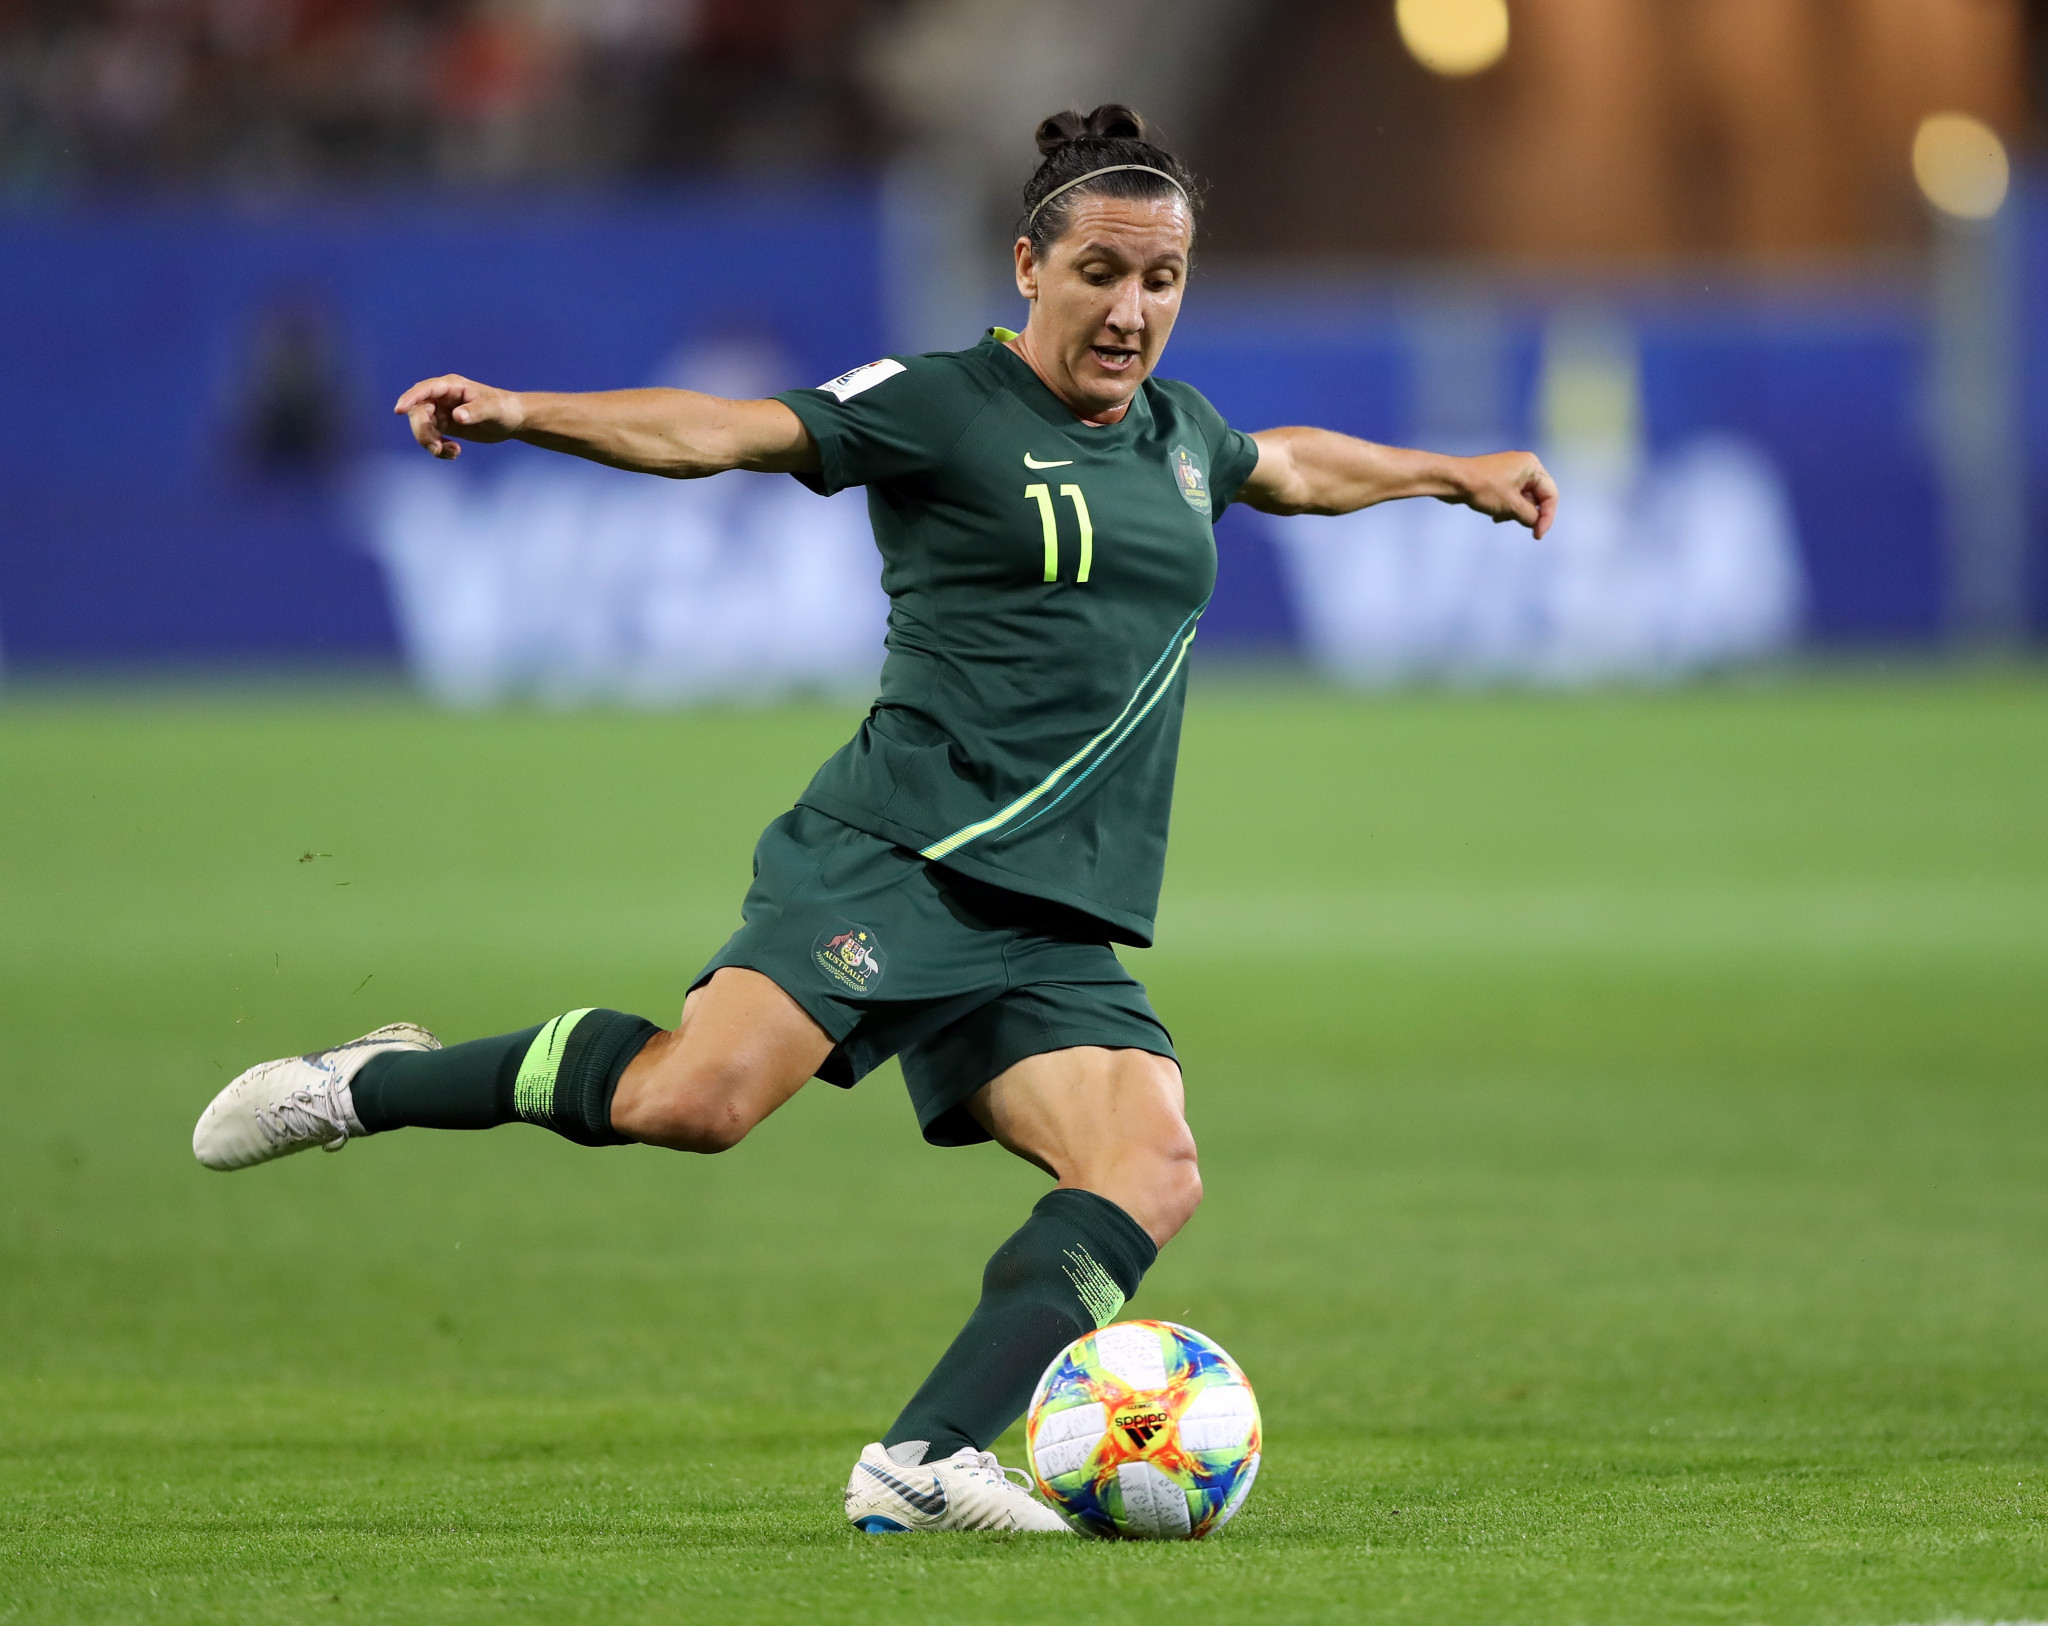 Australian star Lisa De Vanna claimed she was bullied, sexually harassed and ostracised during her Matildas career ©Getty Images 